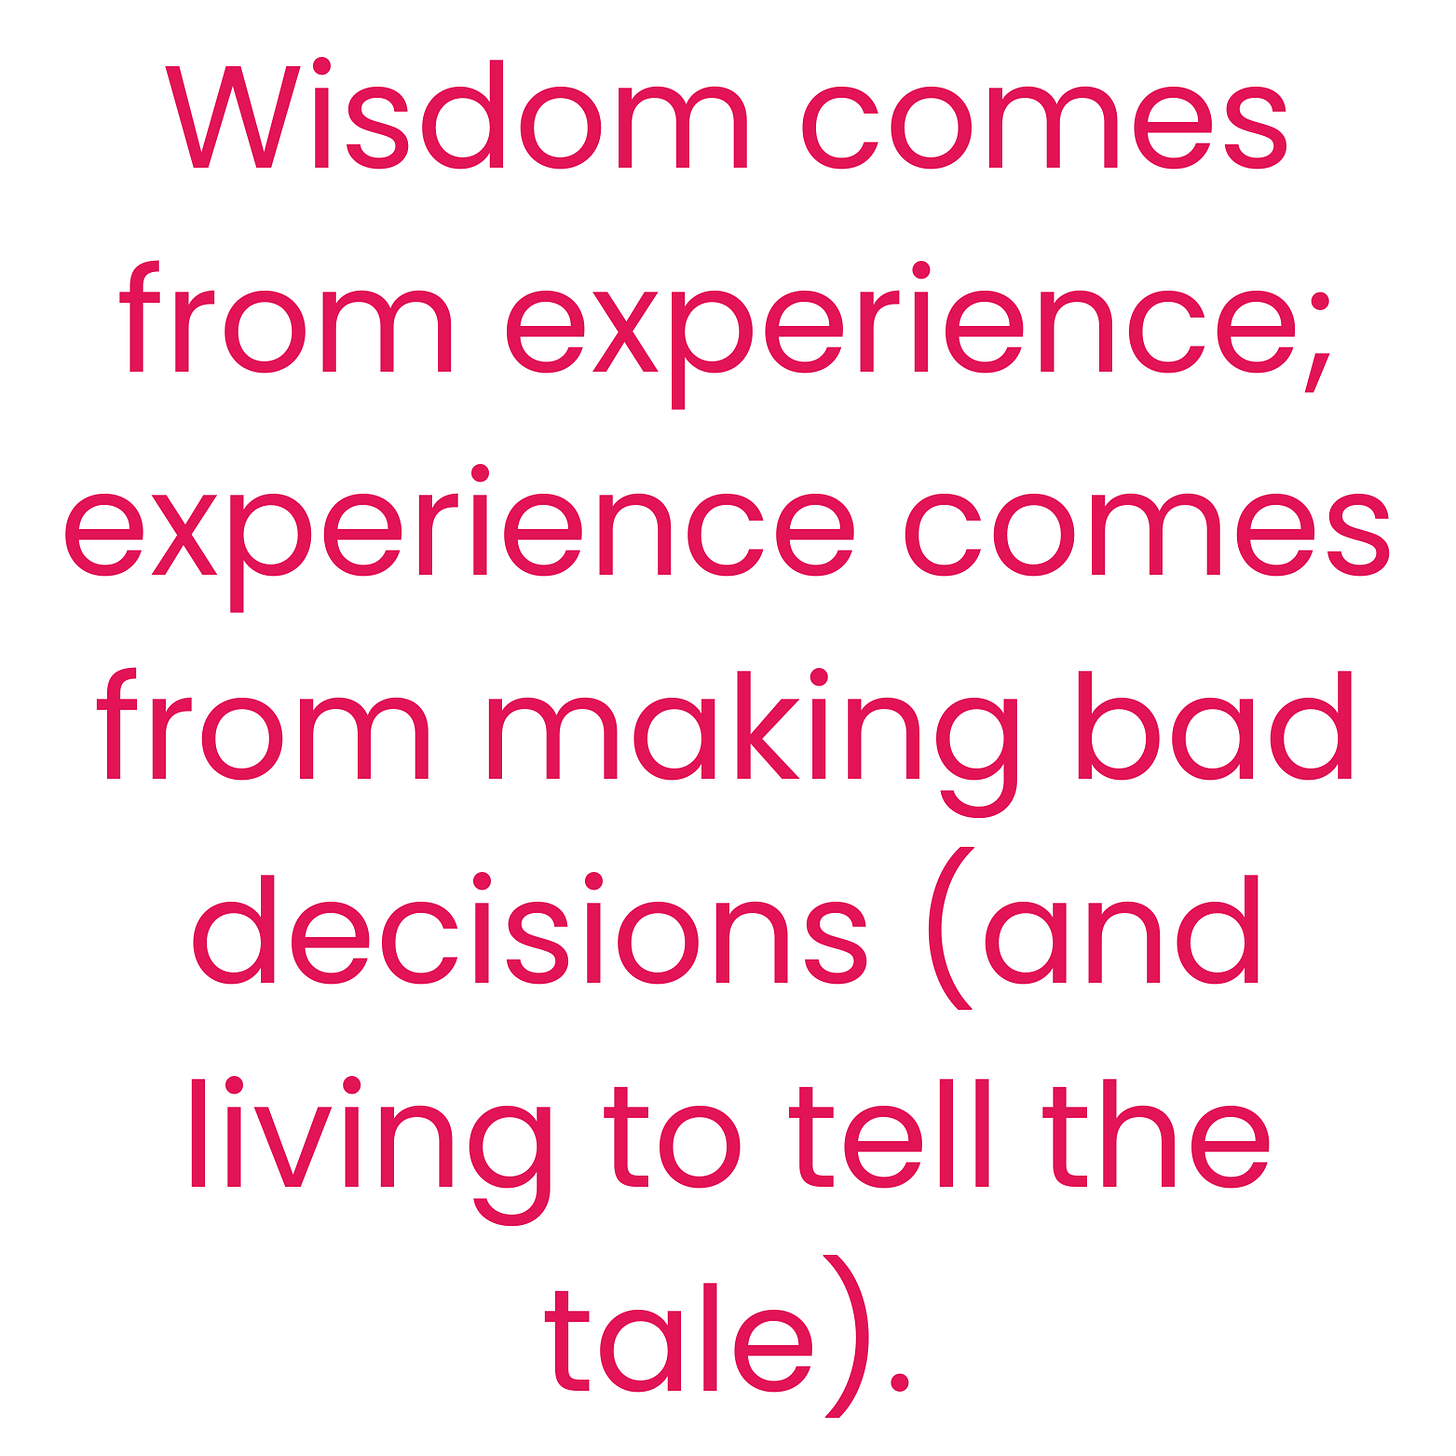 Wisdom comes from experience; and experience comes from making bad decisions (and living to tell the tale).